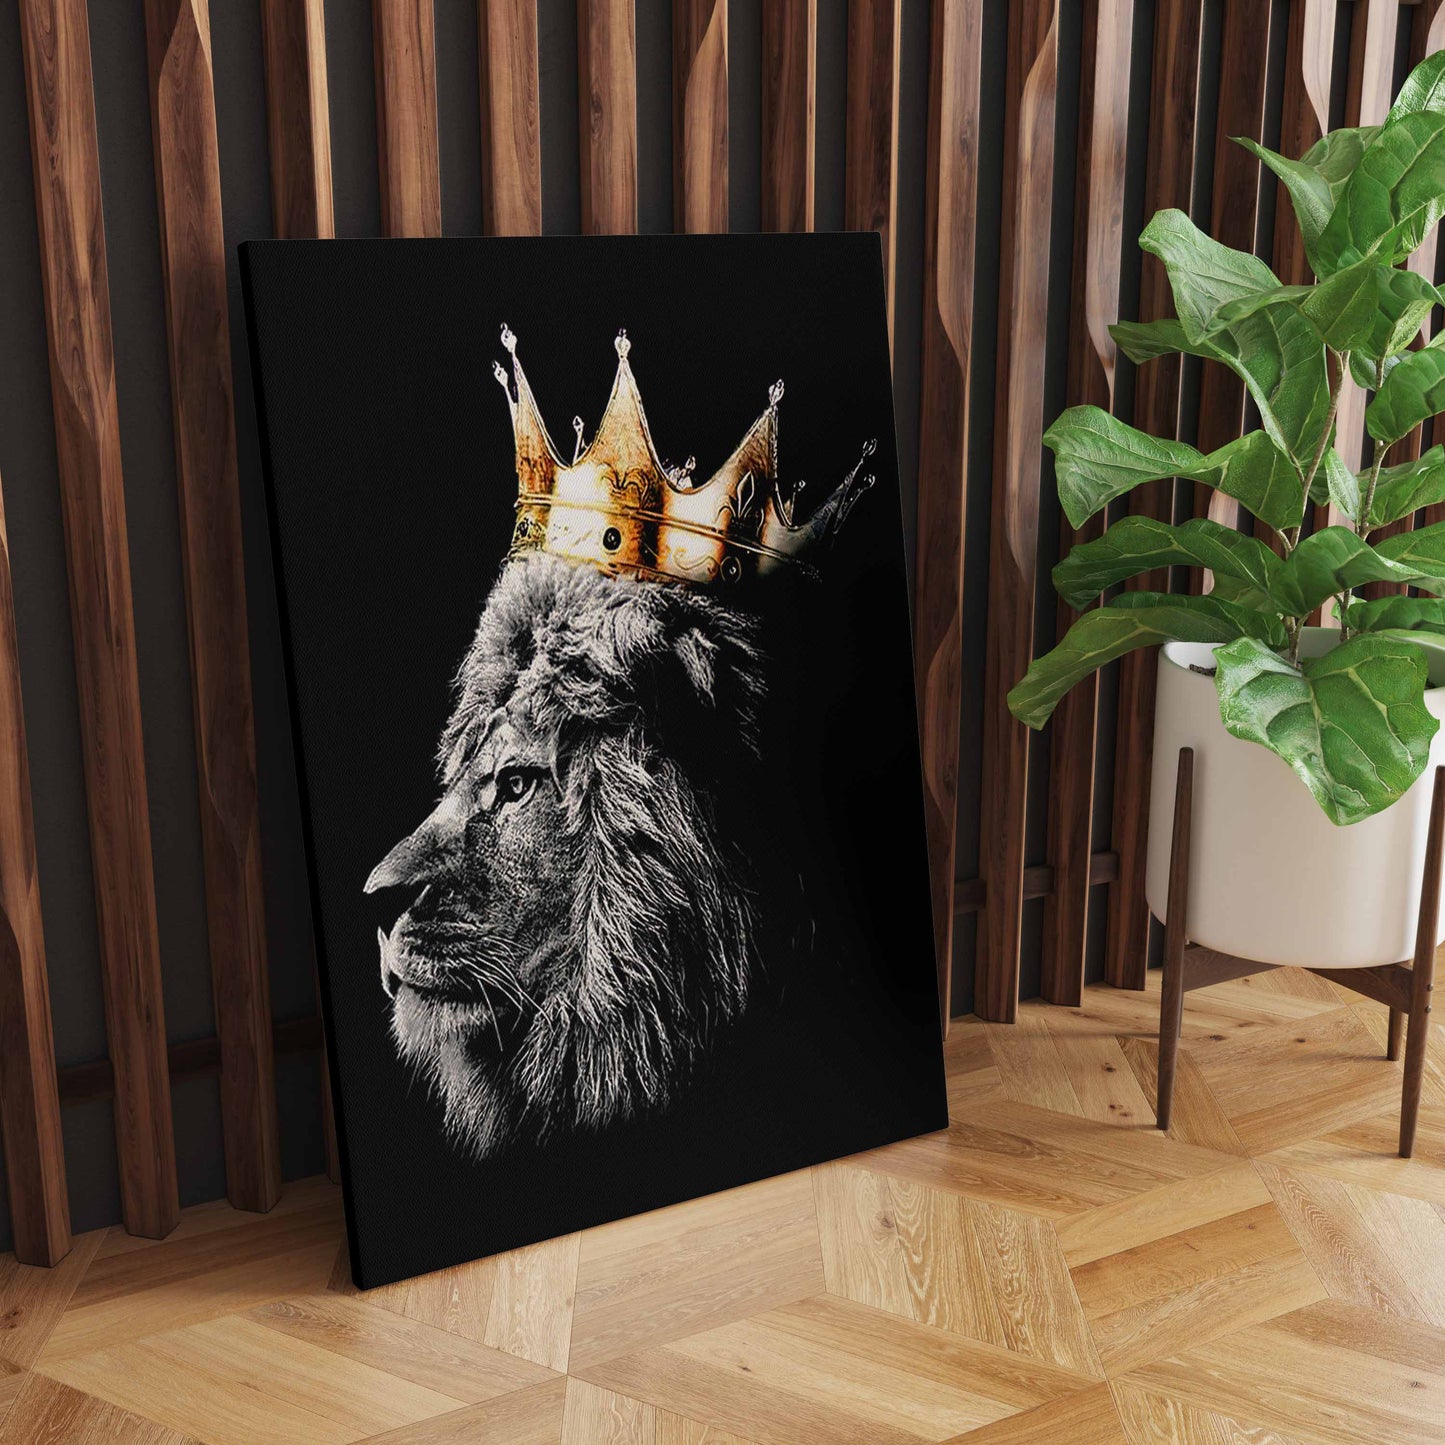 Black and White Lion King and Queen Animal Fabric Printing wall art, Nordic Decor Mural Pictures for Room S04E21